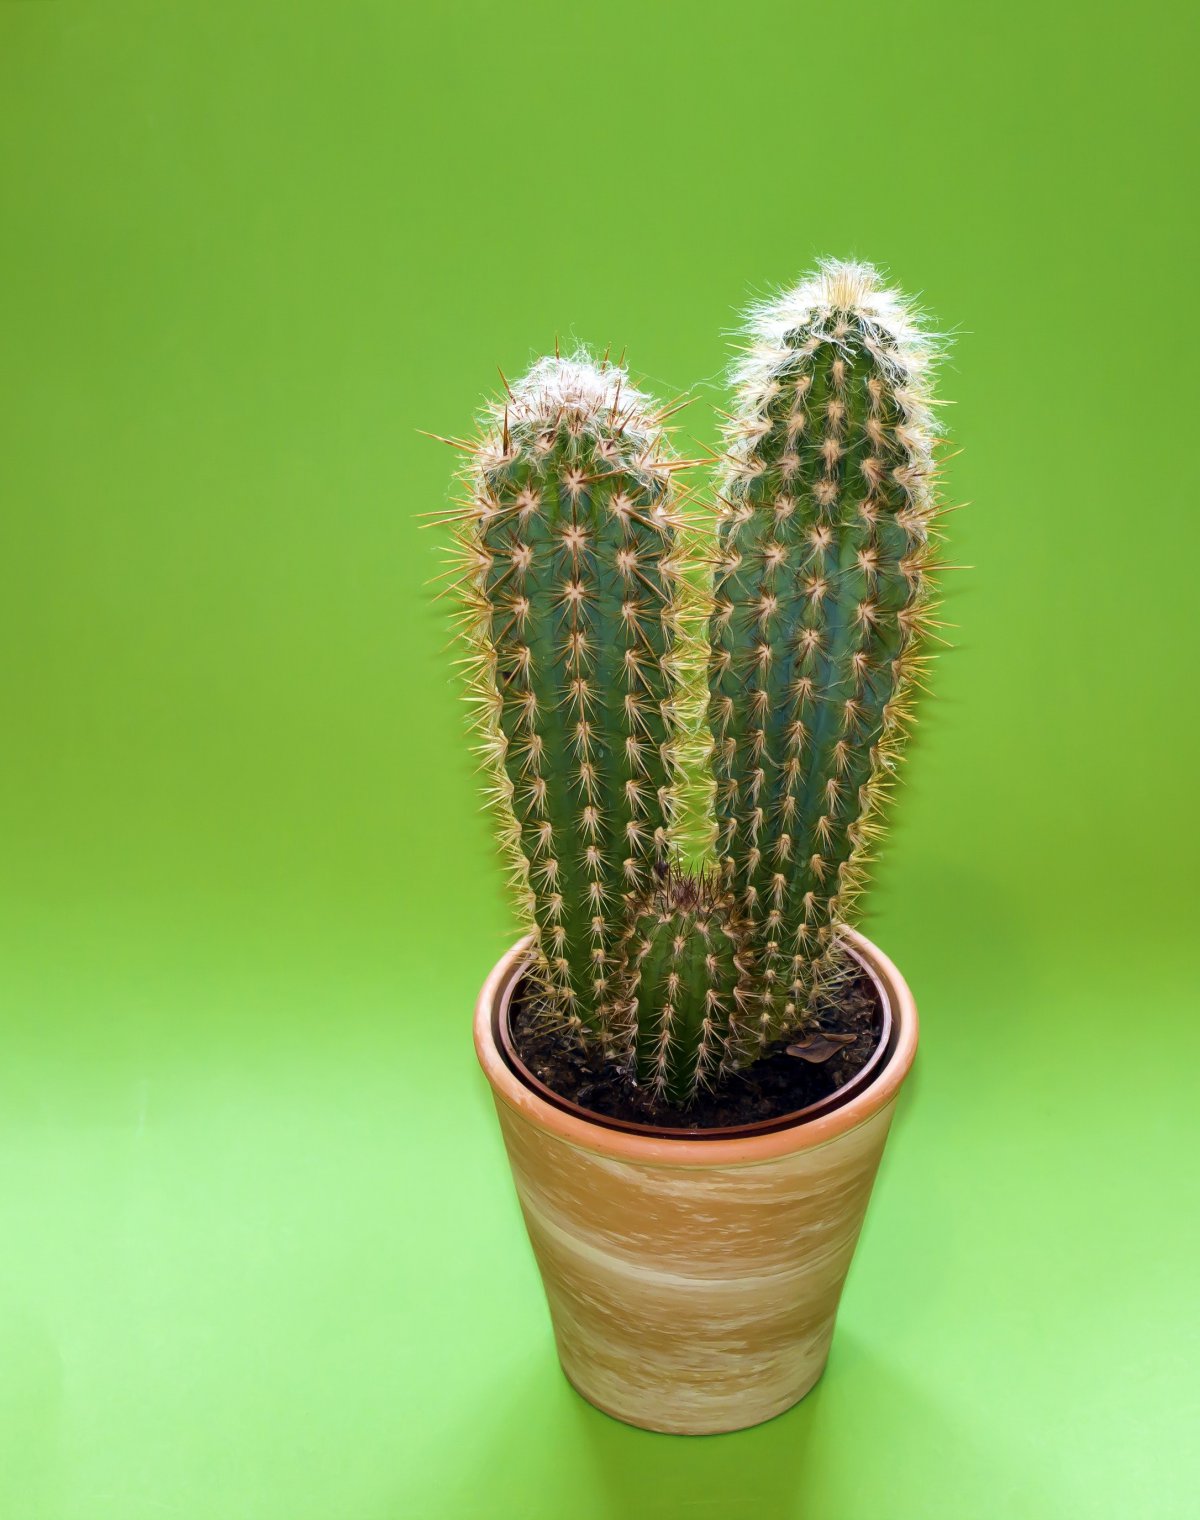 Cactus potted plant pictures